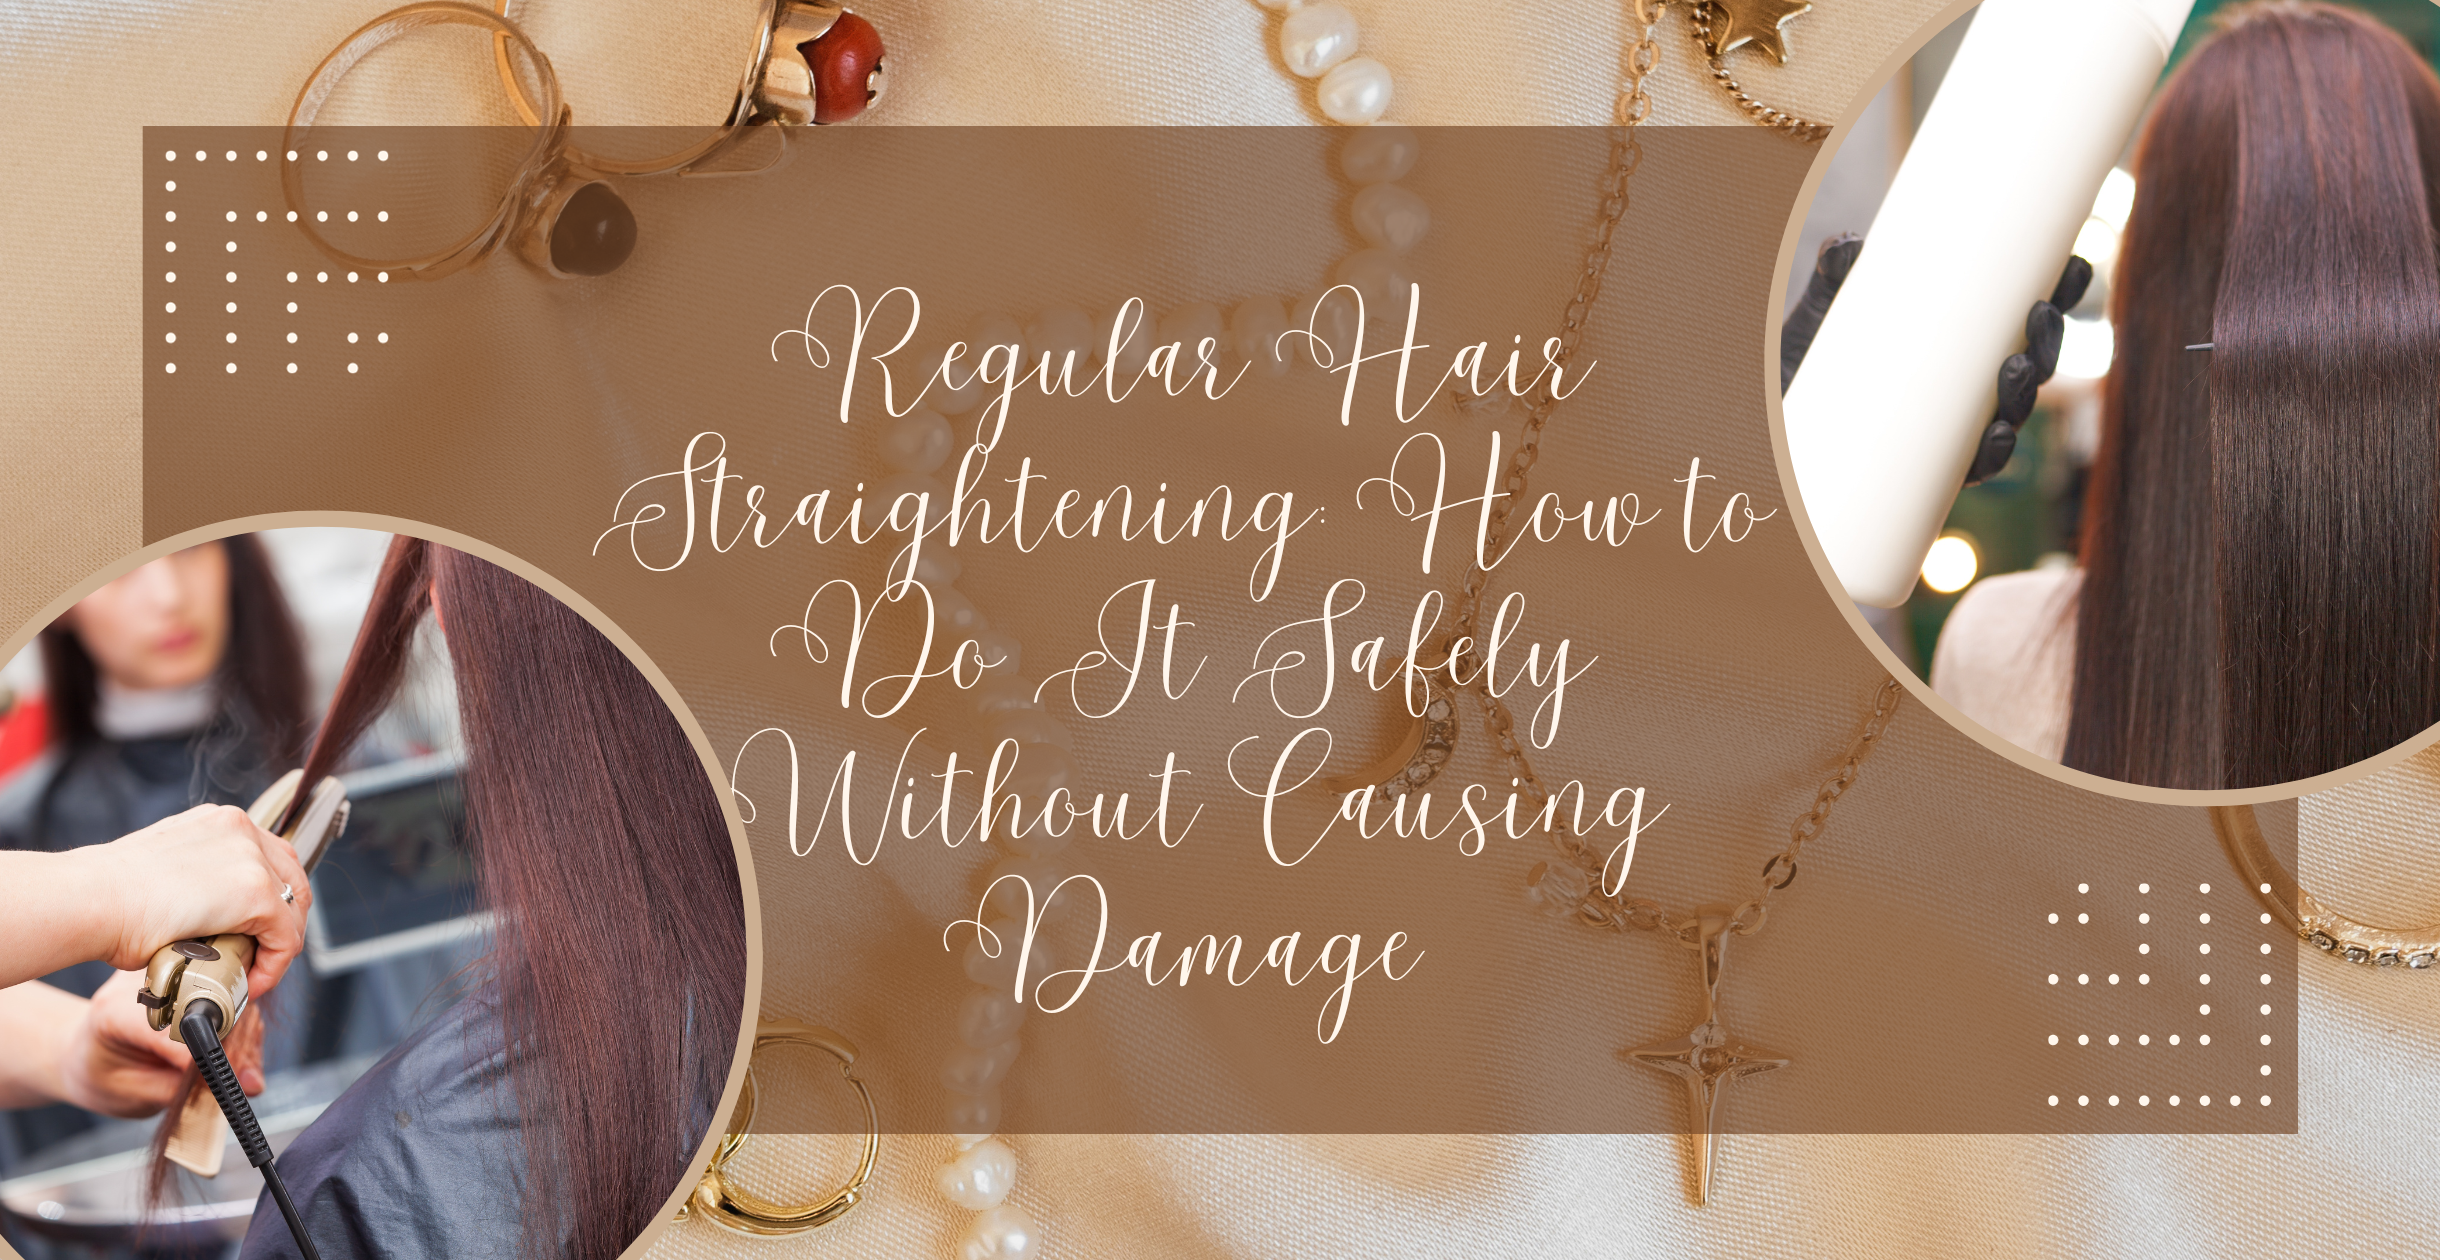 Regular Hair Straightening: How to Do It Safely Without Causing Damage